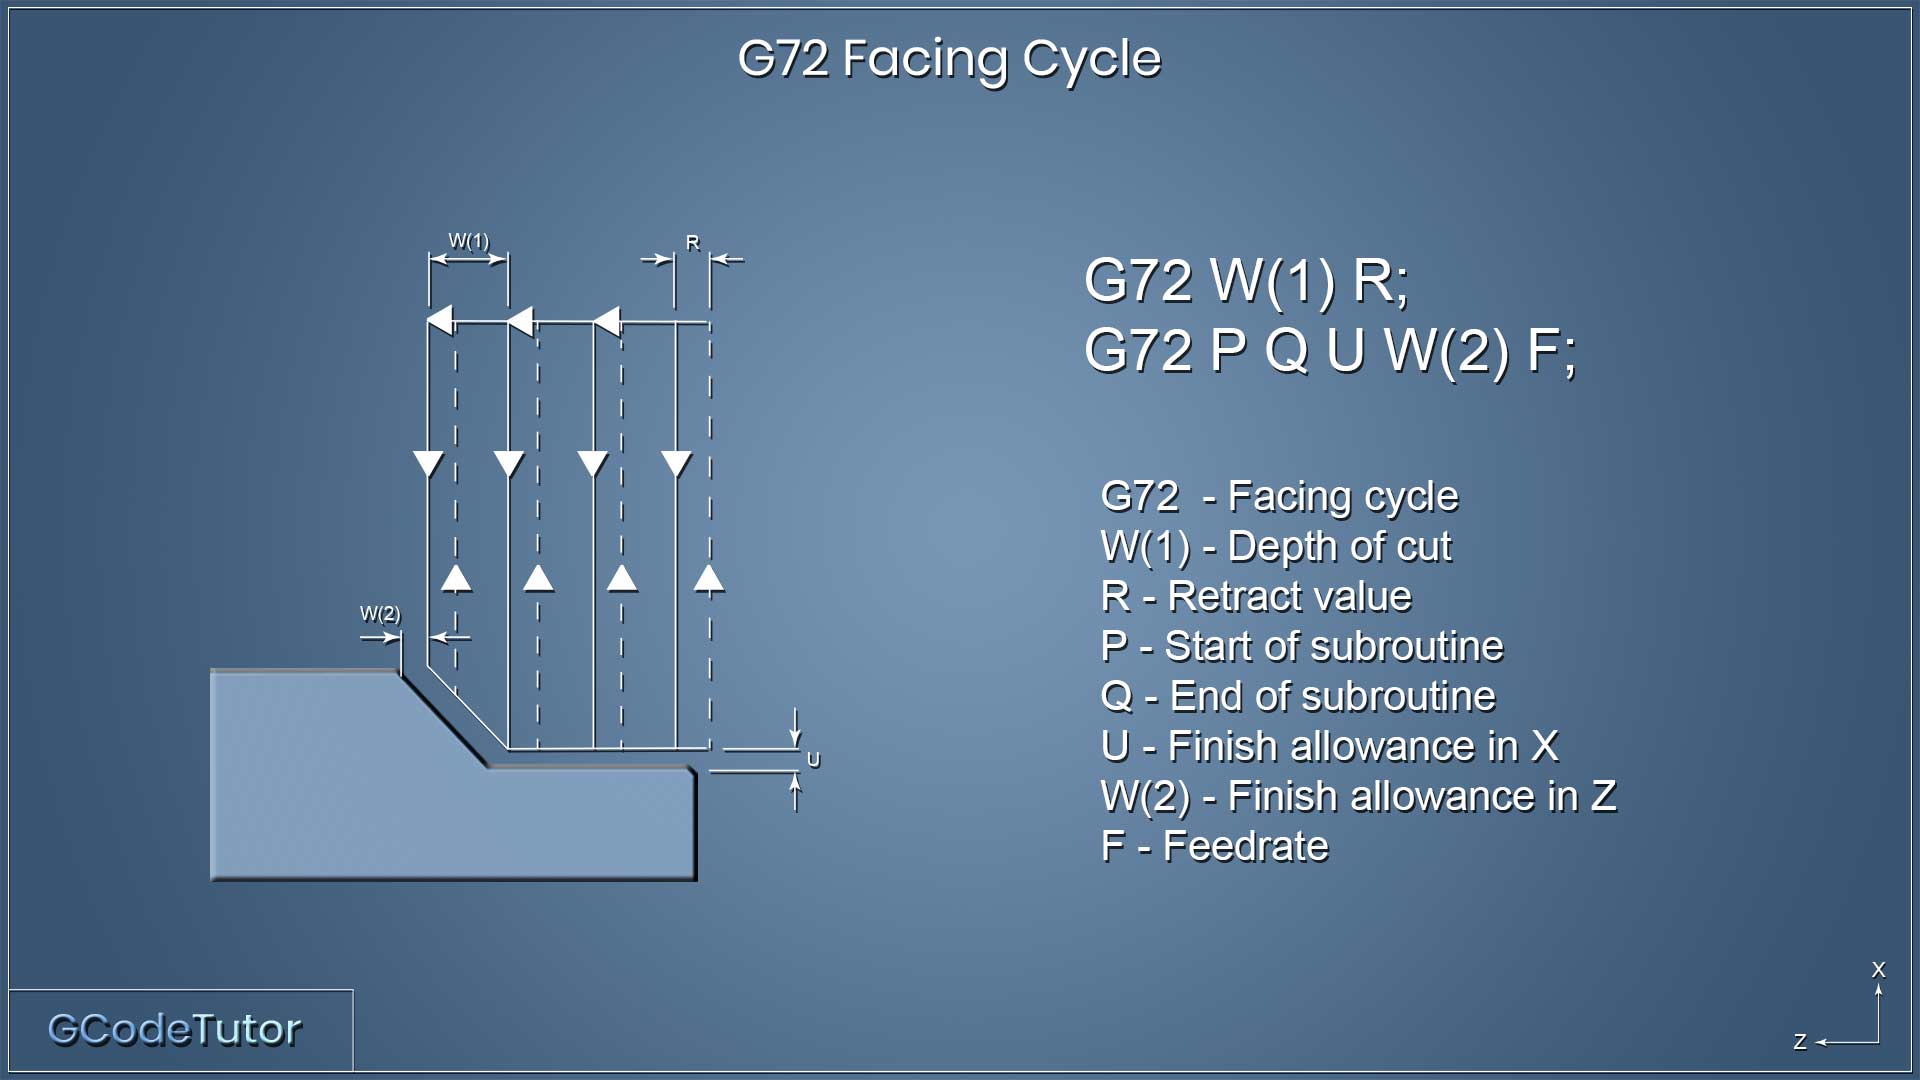 G72 facing cycle on a CNC lathe